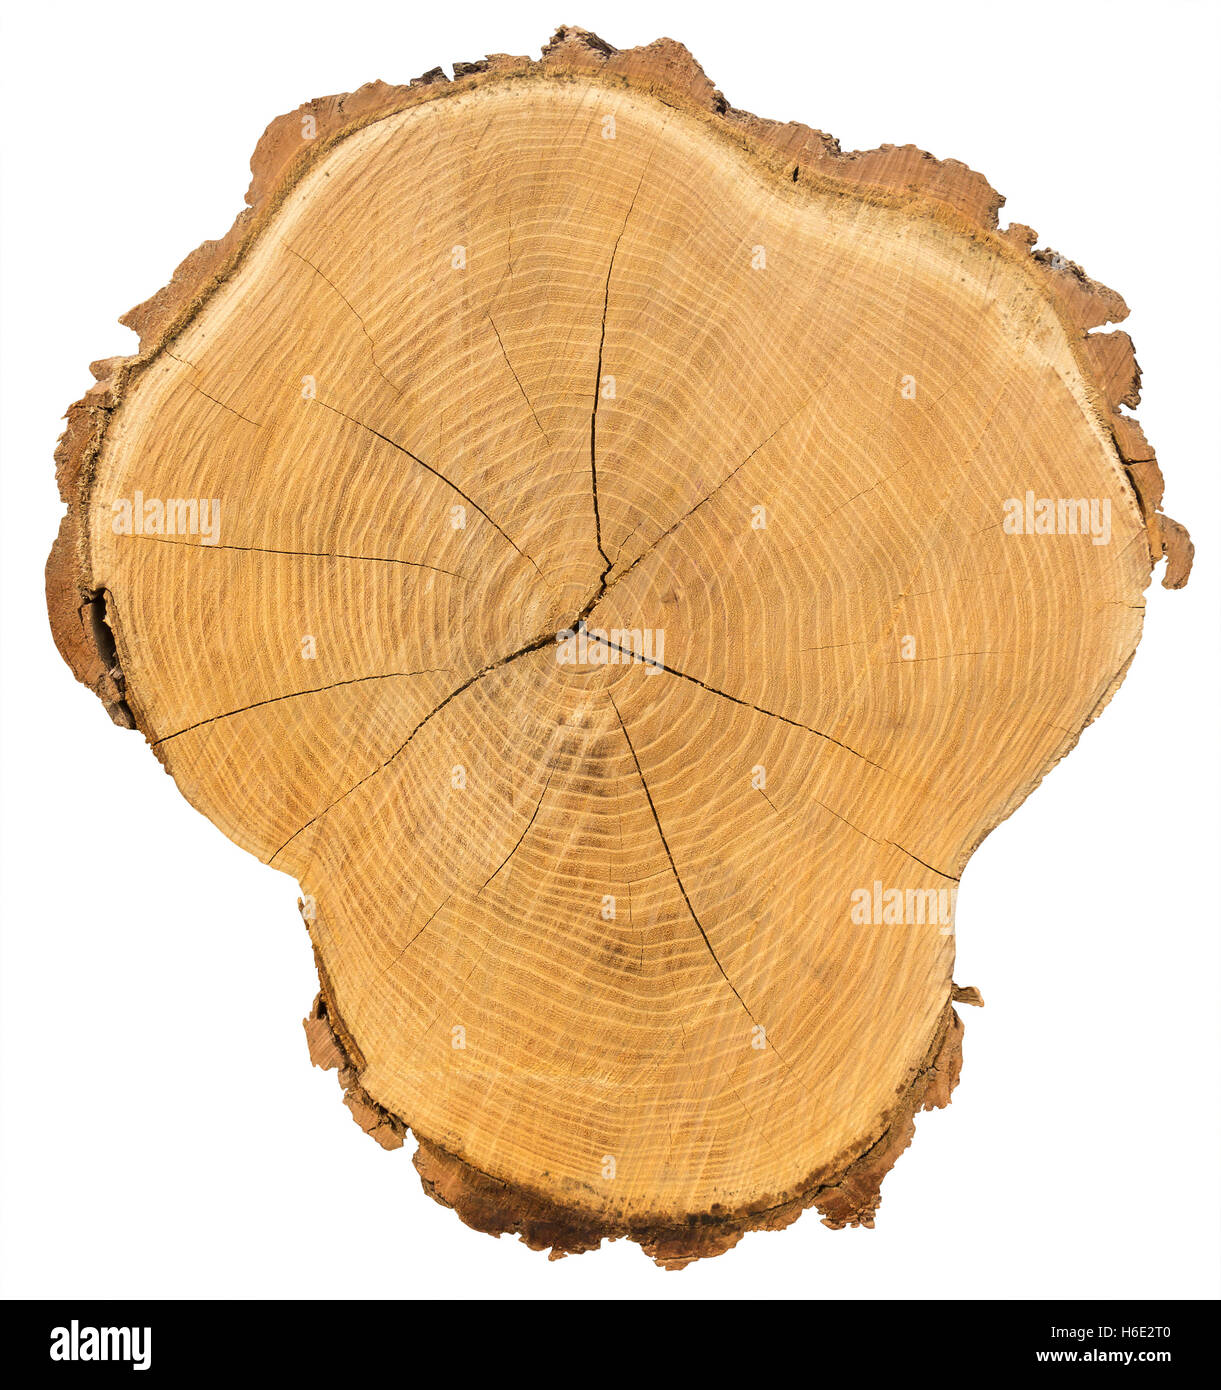 Cross section of tree trunk Isolated with Clipping Path on white background Stock Photo